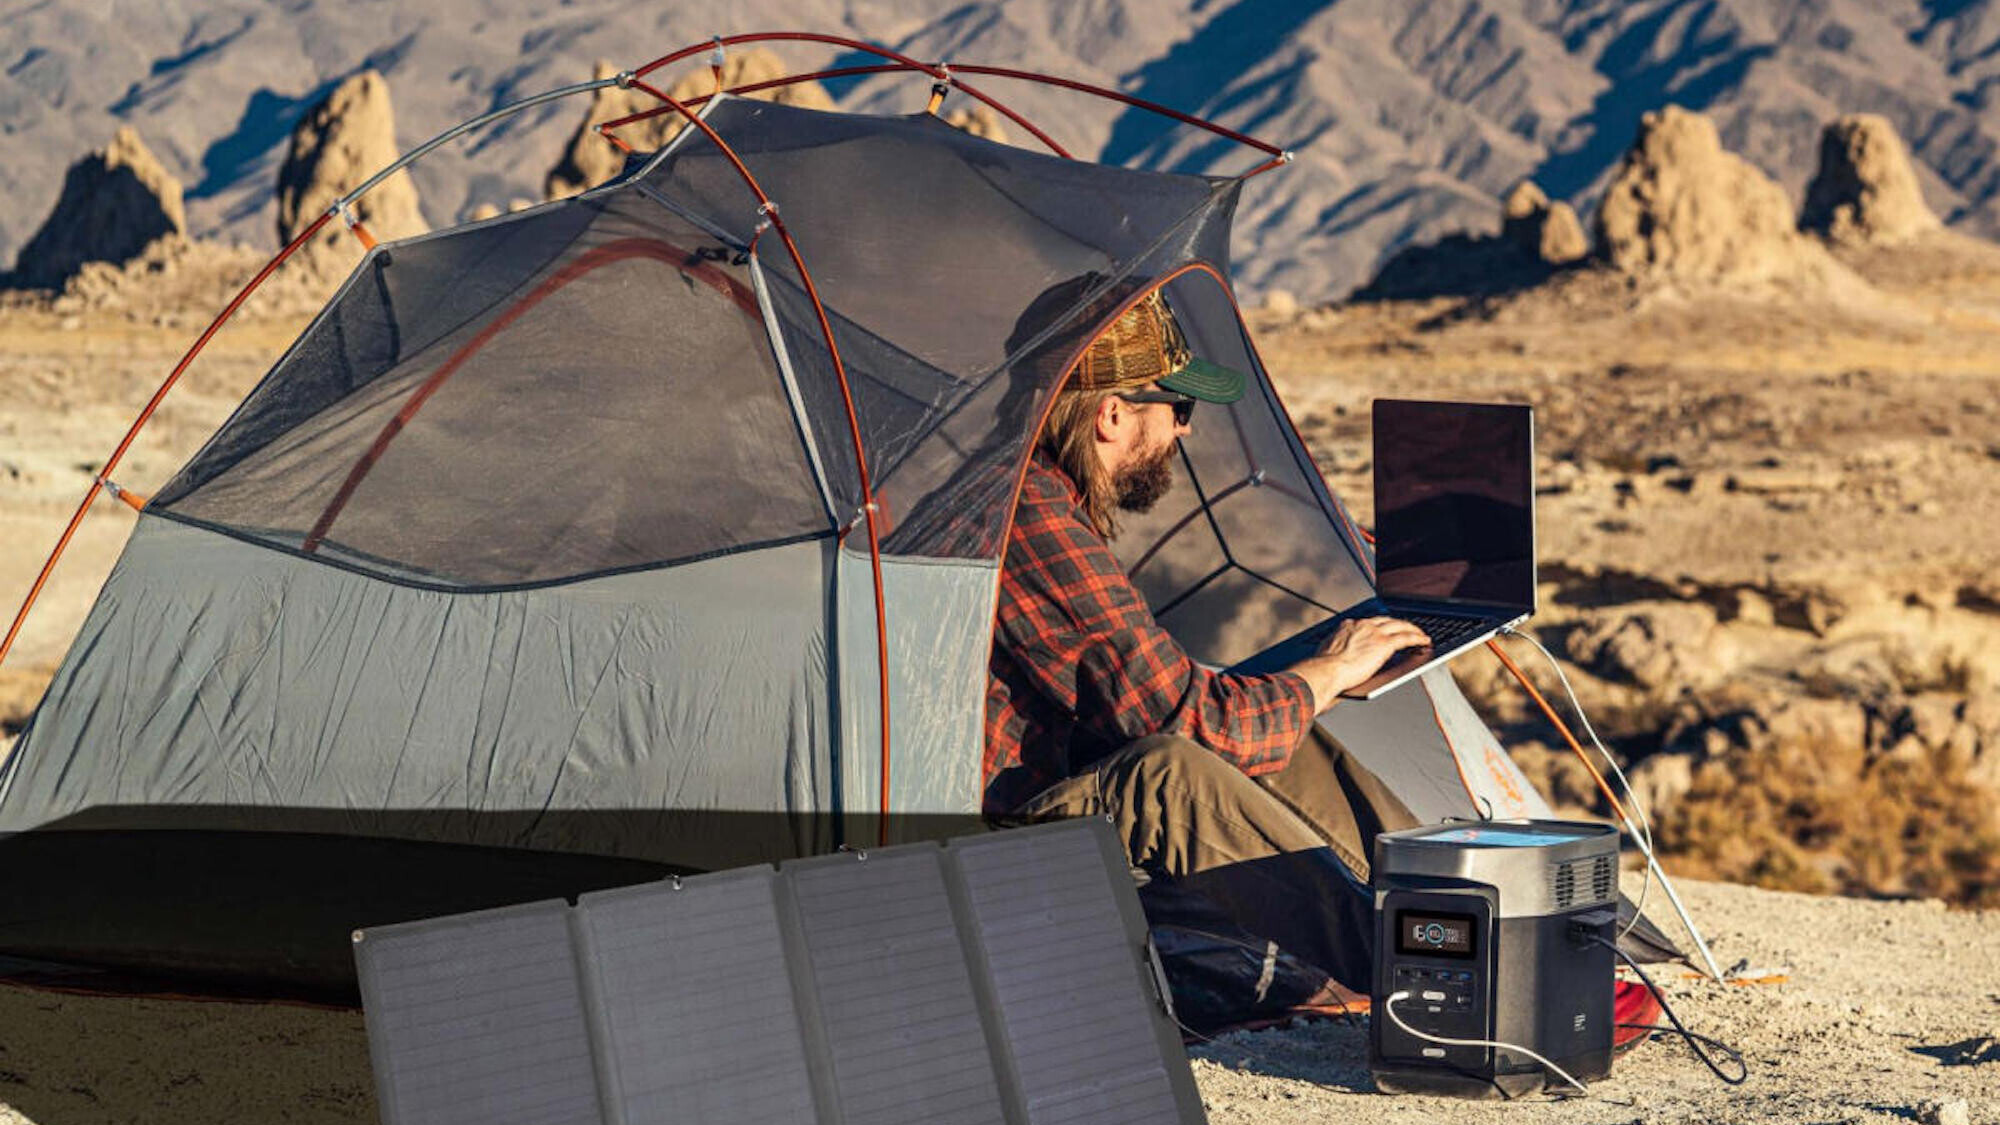 This portable power station and solar panel keep everything running when the power goes out